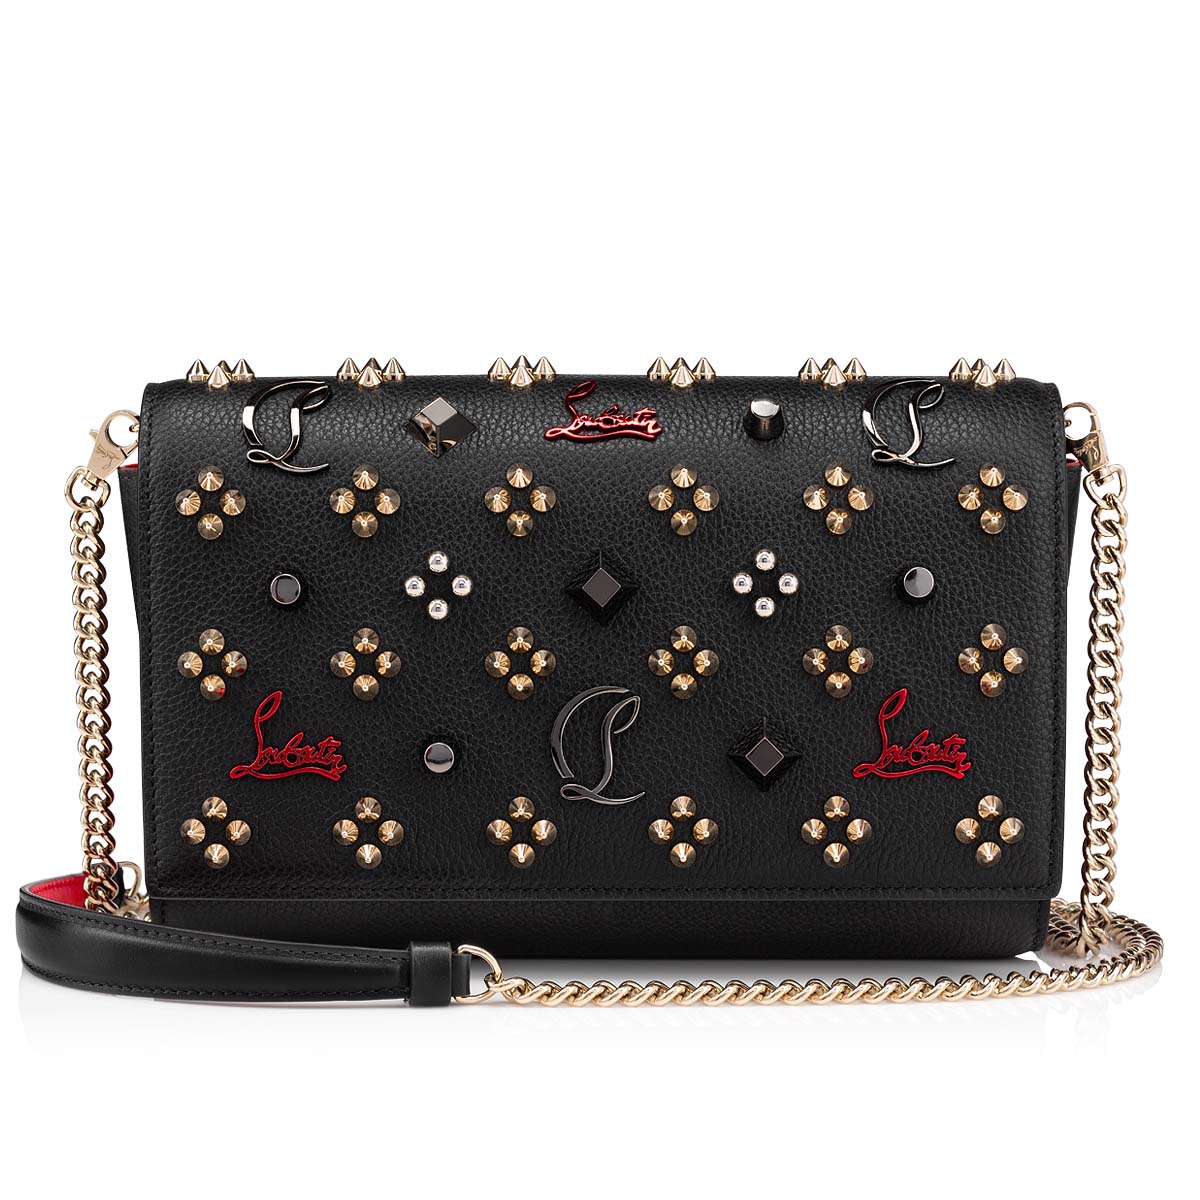 Christian Louboutin Paloma Spikes Patent Psychic Calf Bag – Queen